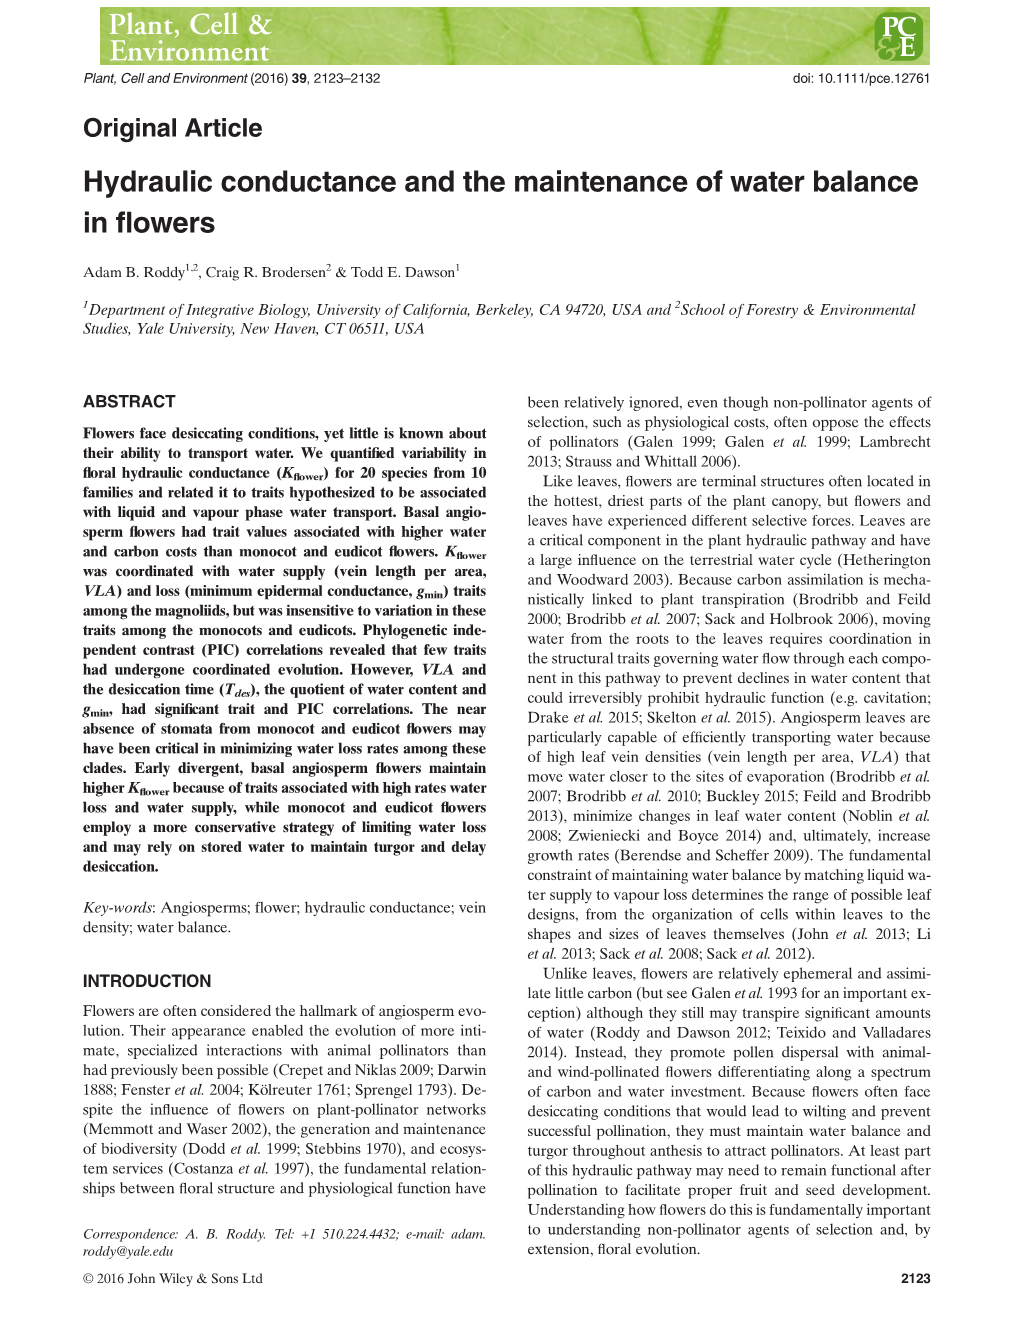 Hydraulic Conductance and the Maintenance of Water Balance in Flowers